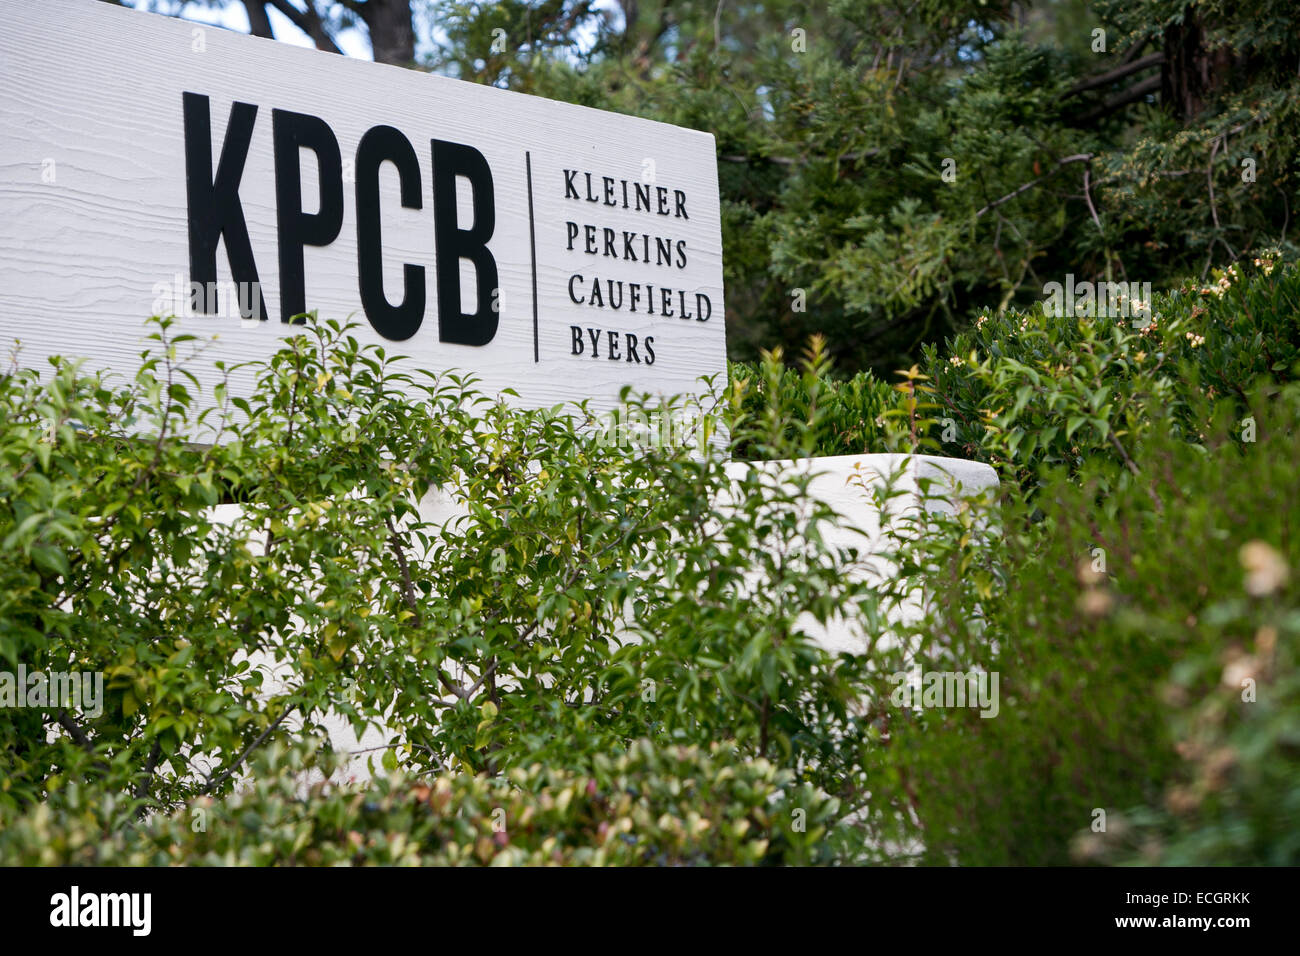 The headquarters of venture capital firm Kleiner Perkins Caufield & Byers. Stock Photo